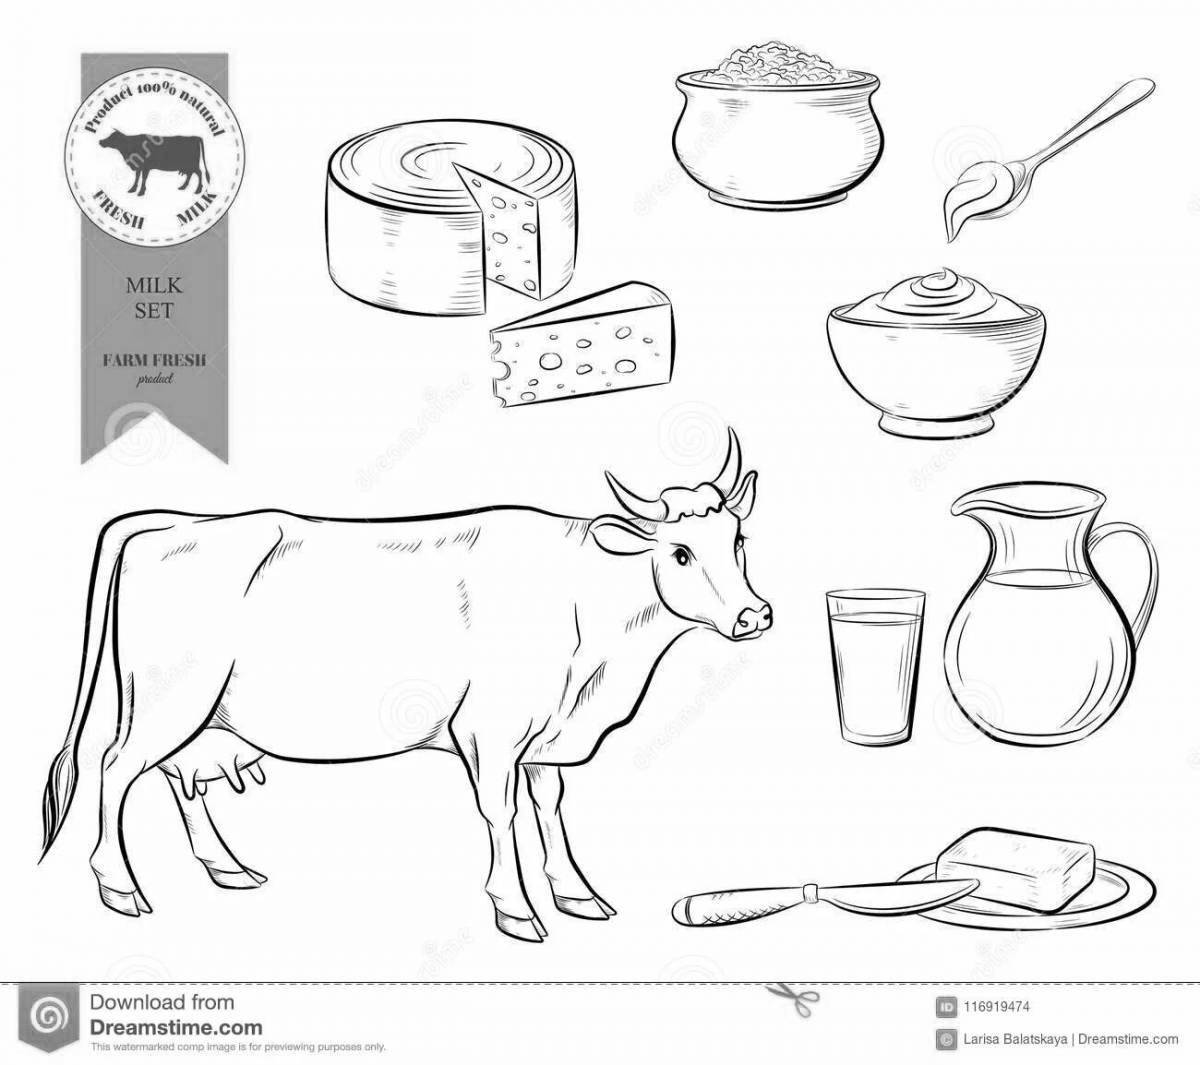 Children's dairy coloring book